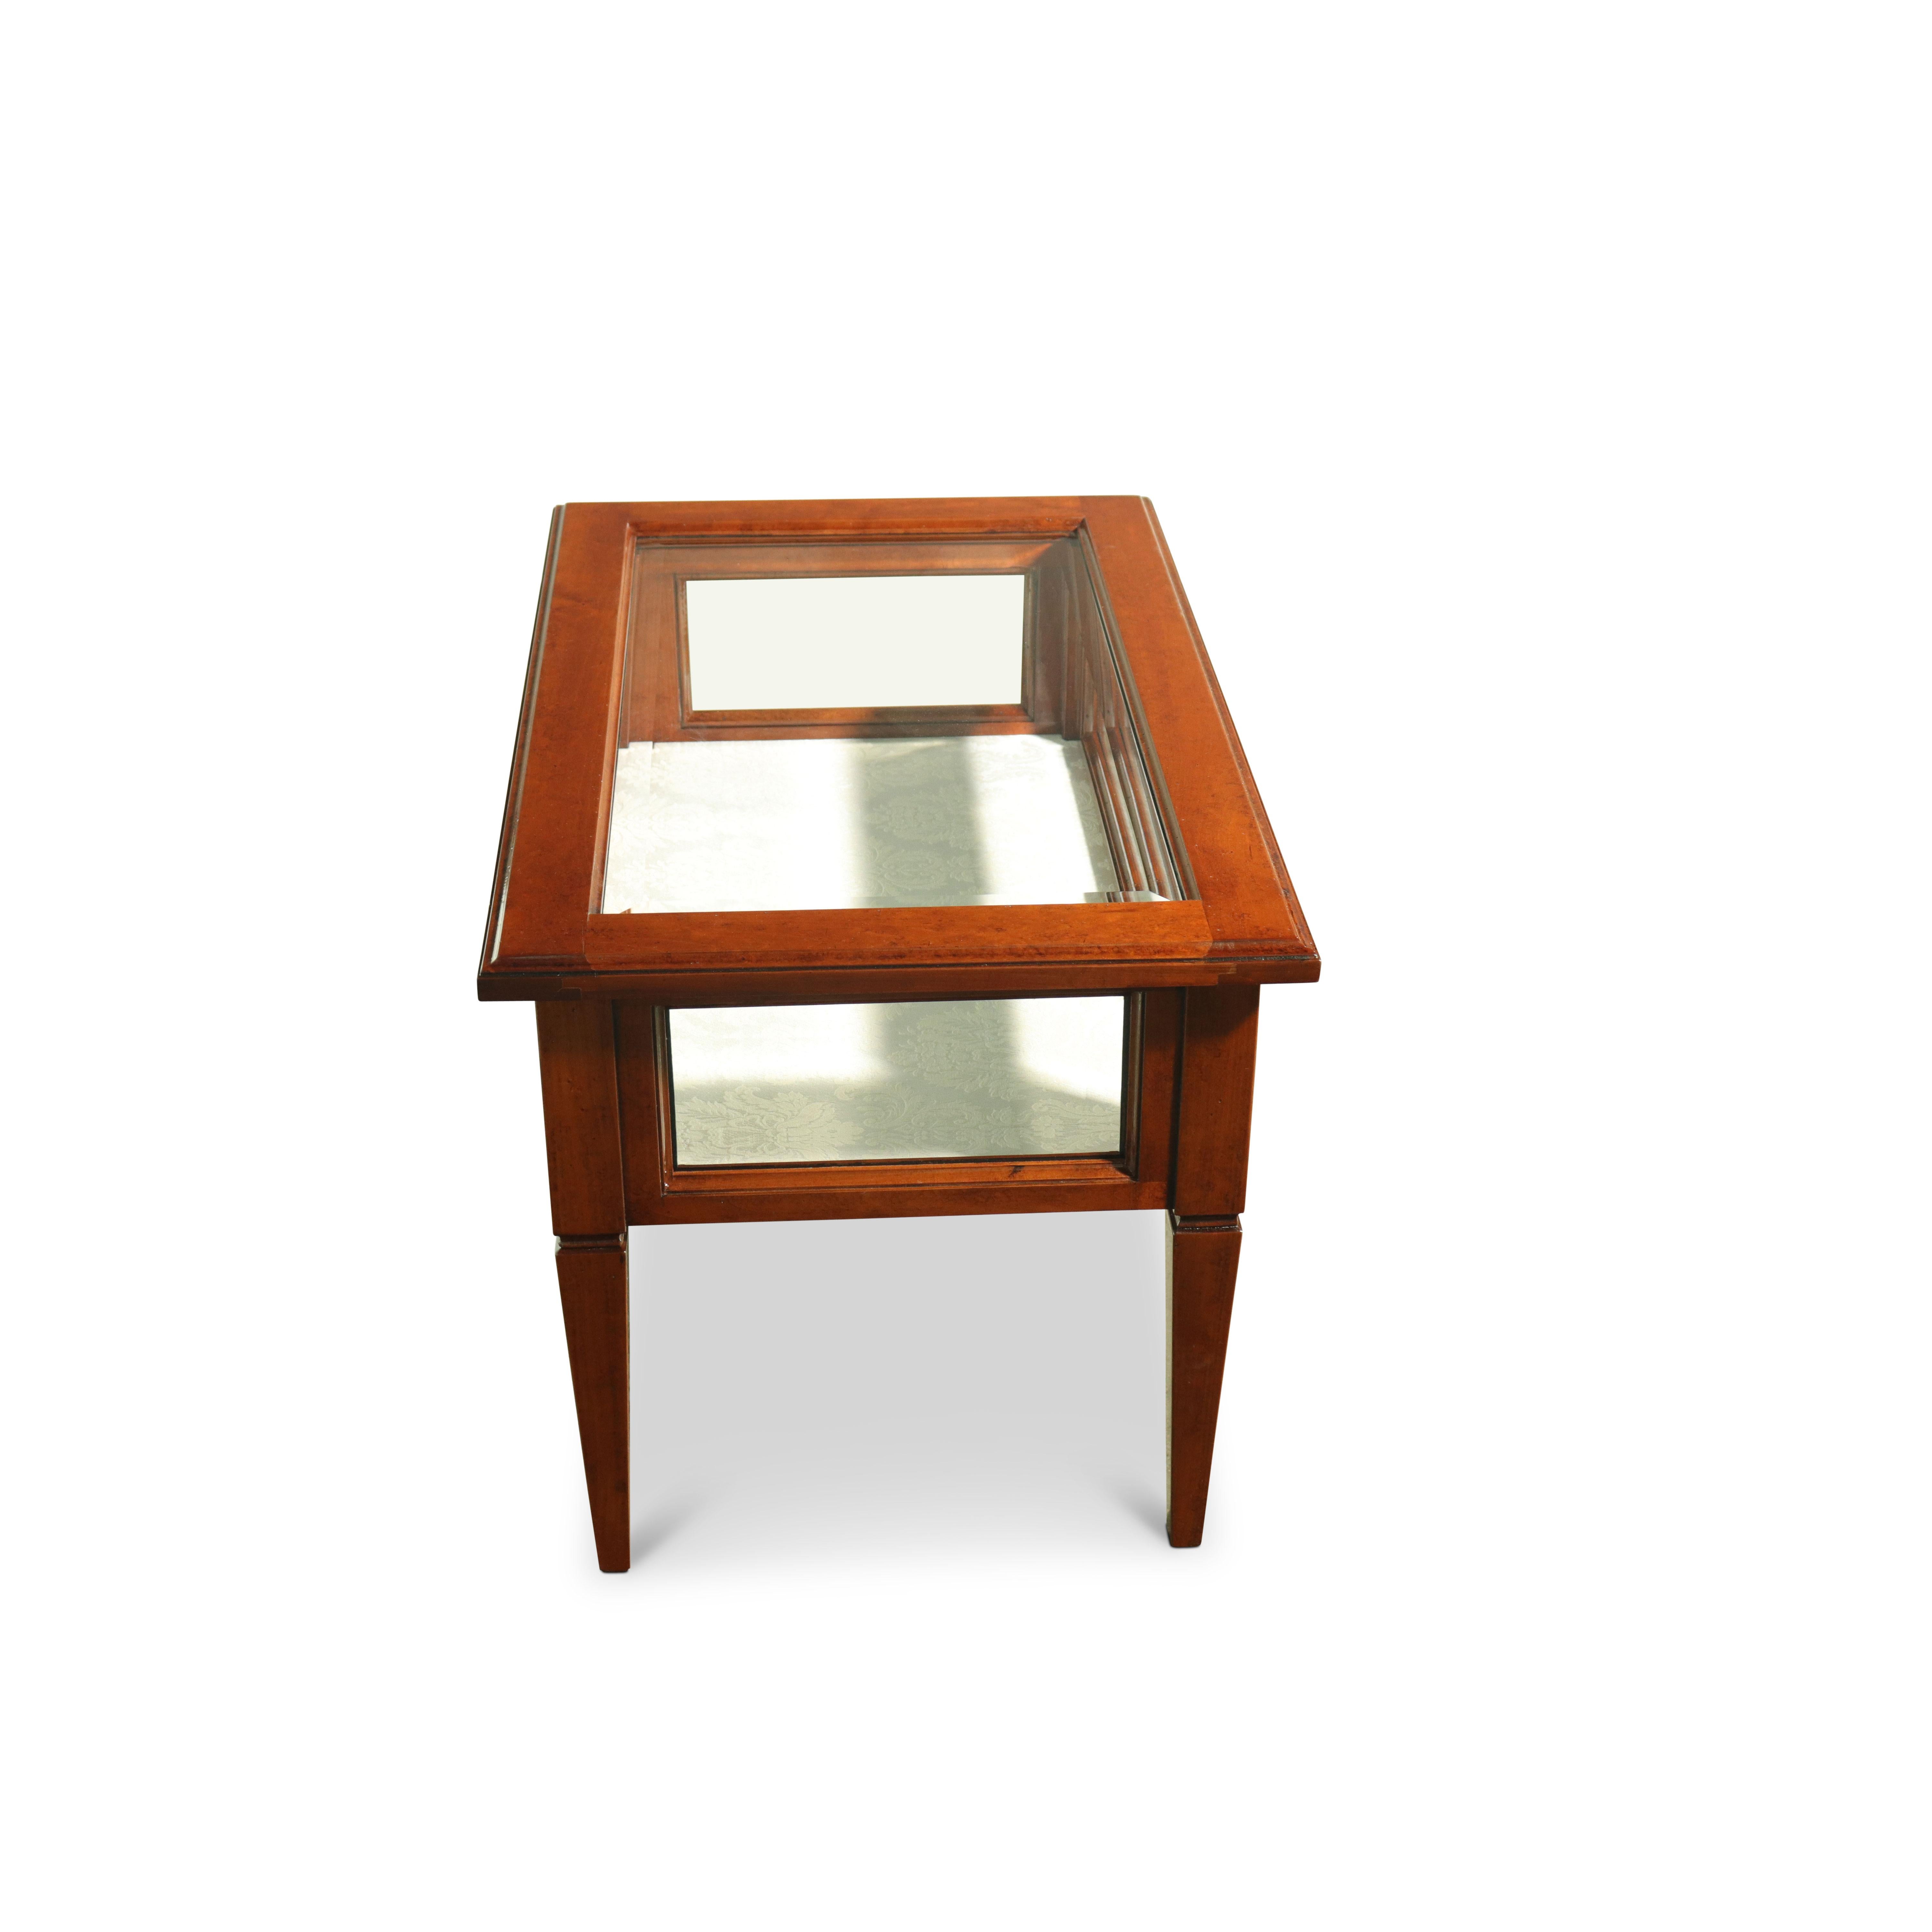 Handcrafted in Venezia, this beautiful Empire inspired bevelled glass display case features solid walnut exterior and Italian cream silk interior. The drawer slides out to display all your precious items. A stunningly exquisite Italian designer